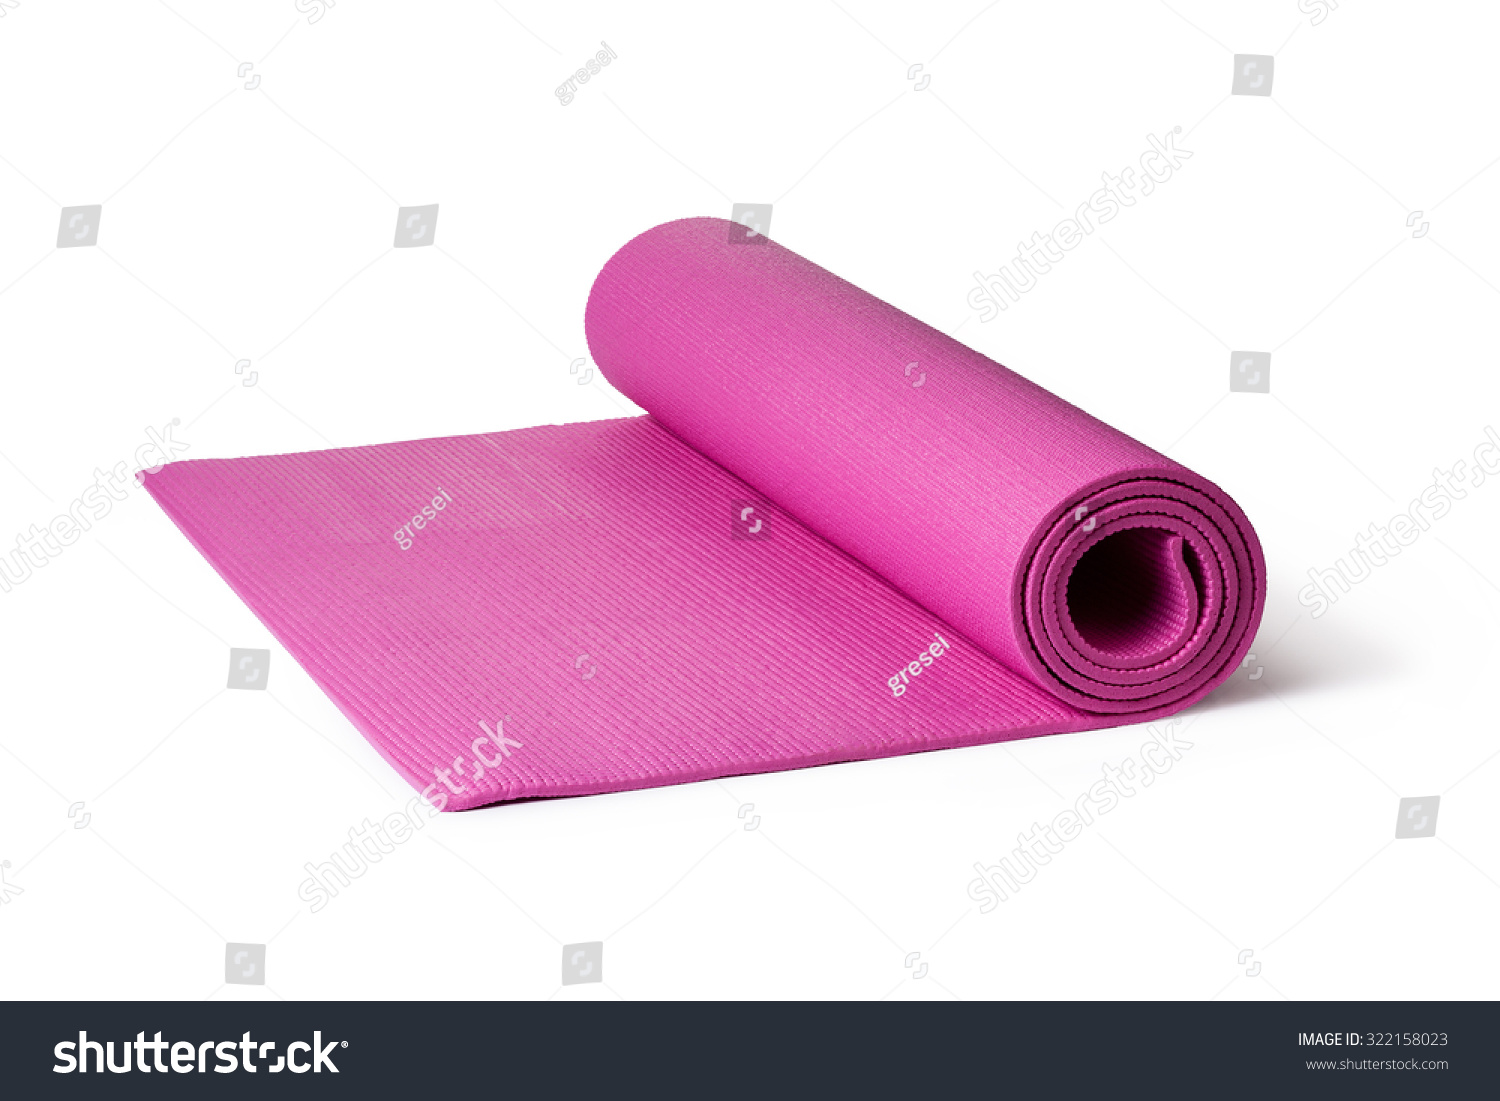 Pink Yoga Mat On A White Background Stock Photo 322158023 : Shutterstock